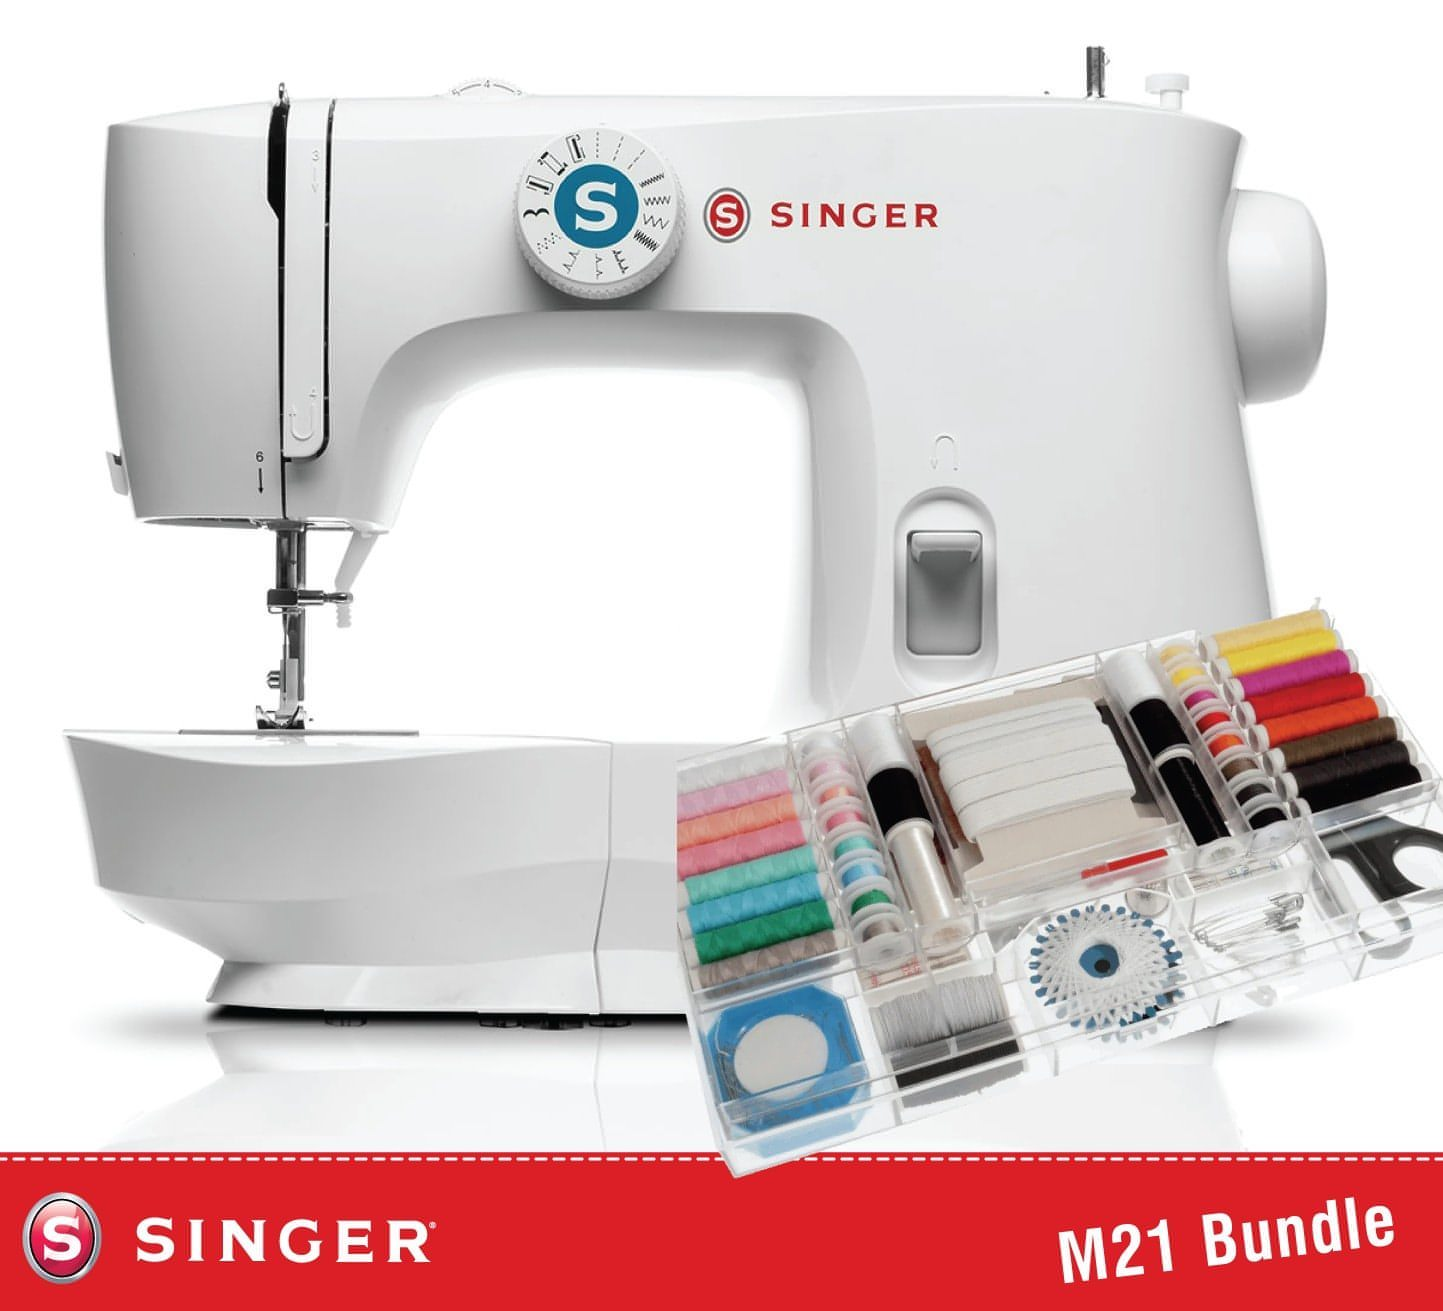 Singer M2105 Sewing Machine with 167 piece Sewing Kit